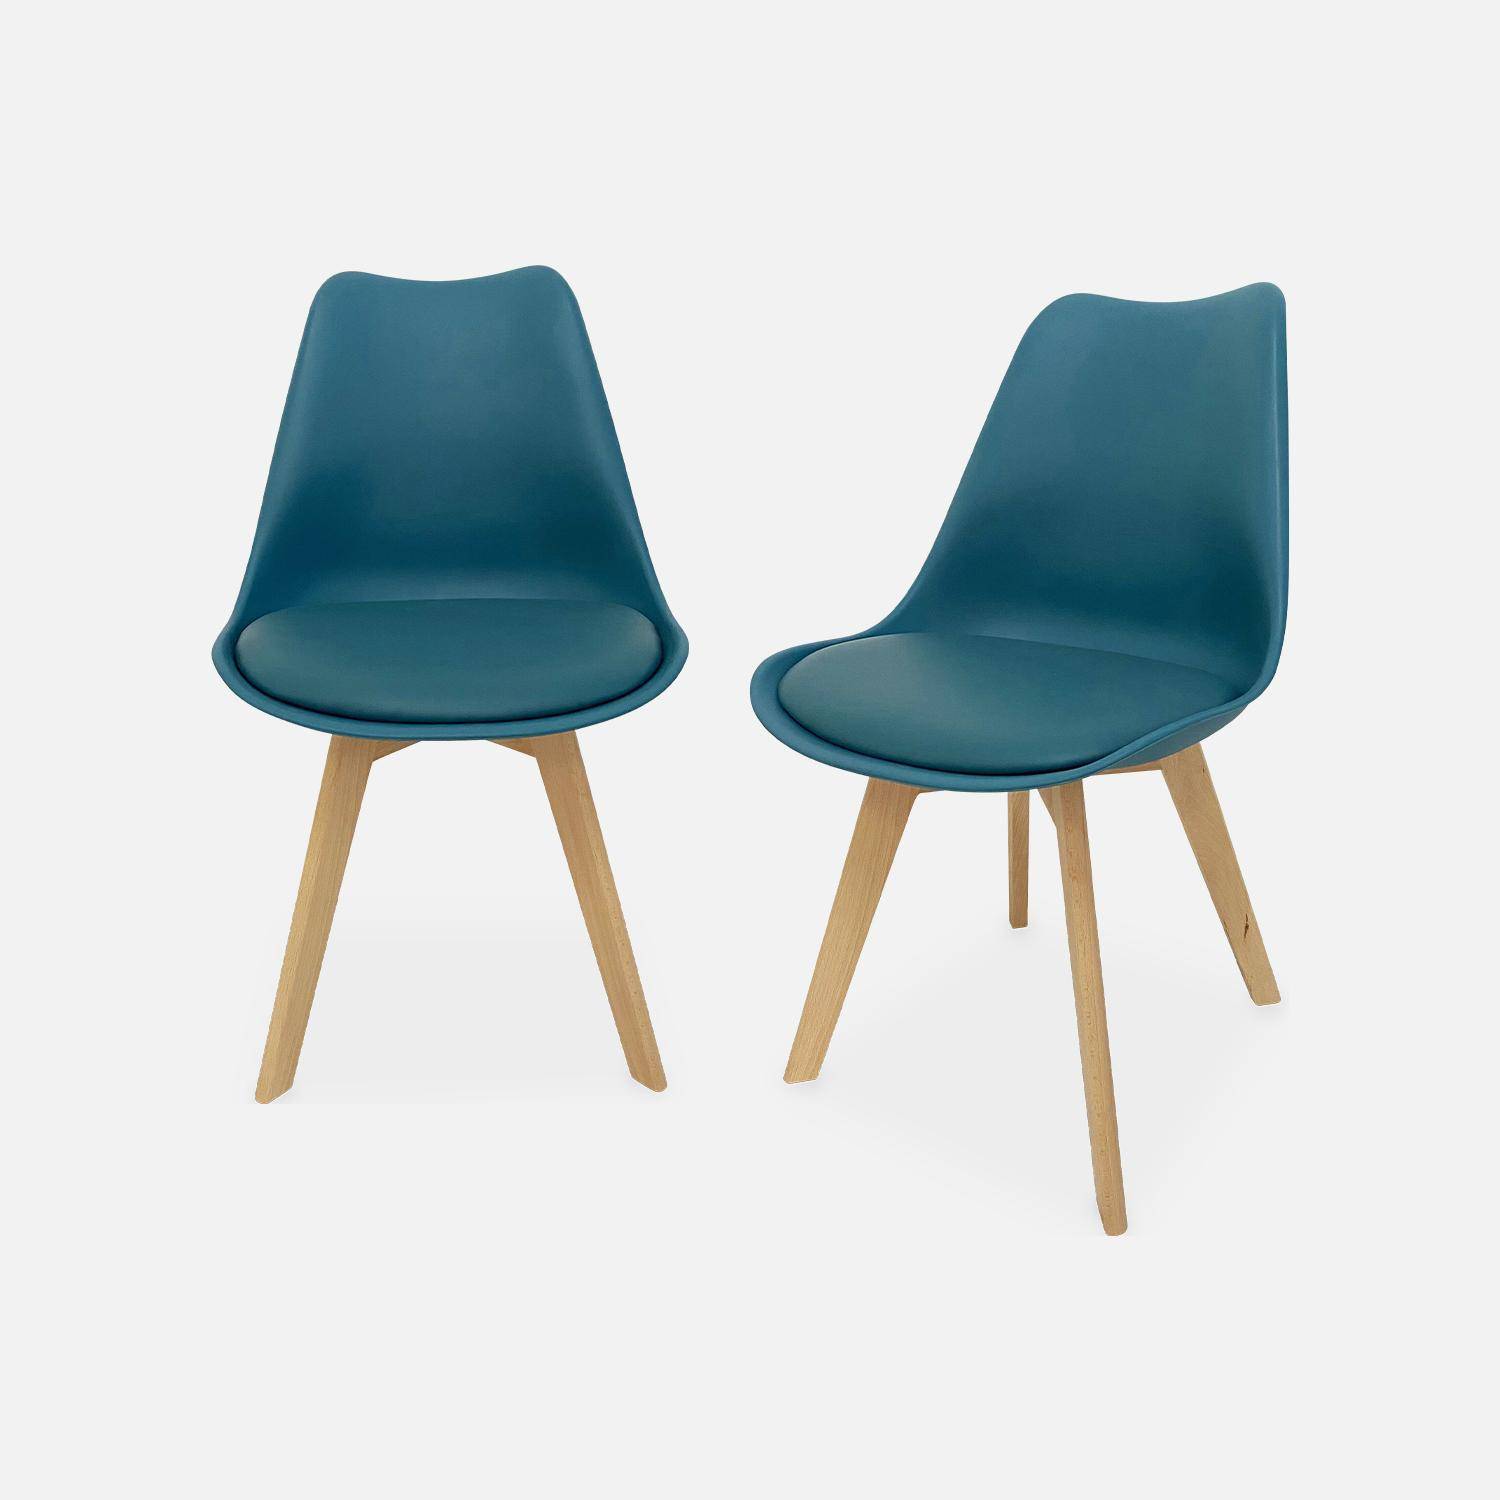 Pair of scandi-style faux-leather dining chair, blue, L49 x D55 x H81cm, NILS,sweeek,Photo1